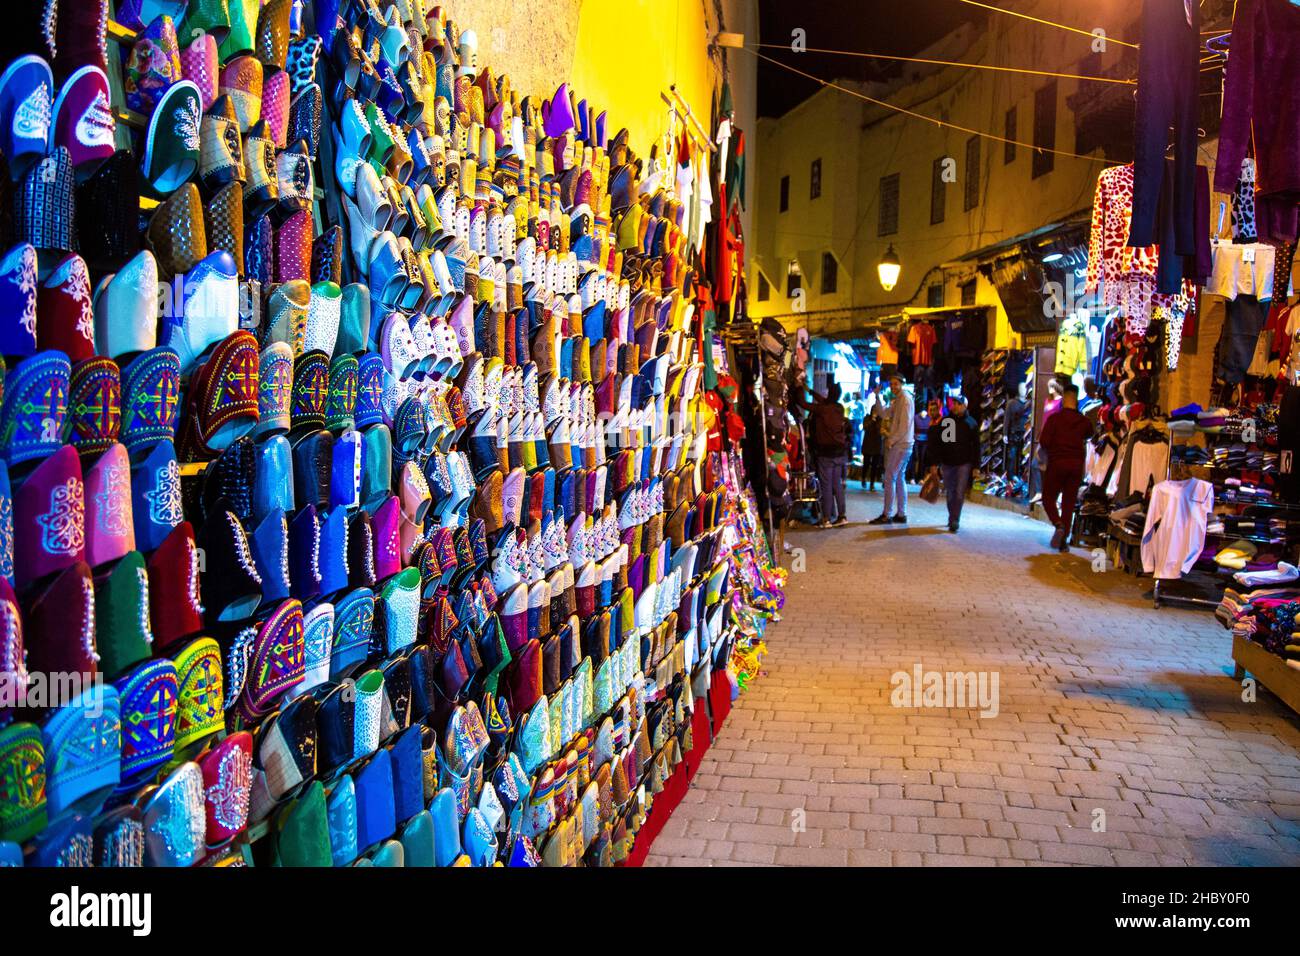 Moroccan slippers, narrow street with market stalls and shops in the souks in the medina, Fes, Morocco Stock Photo